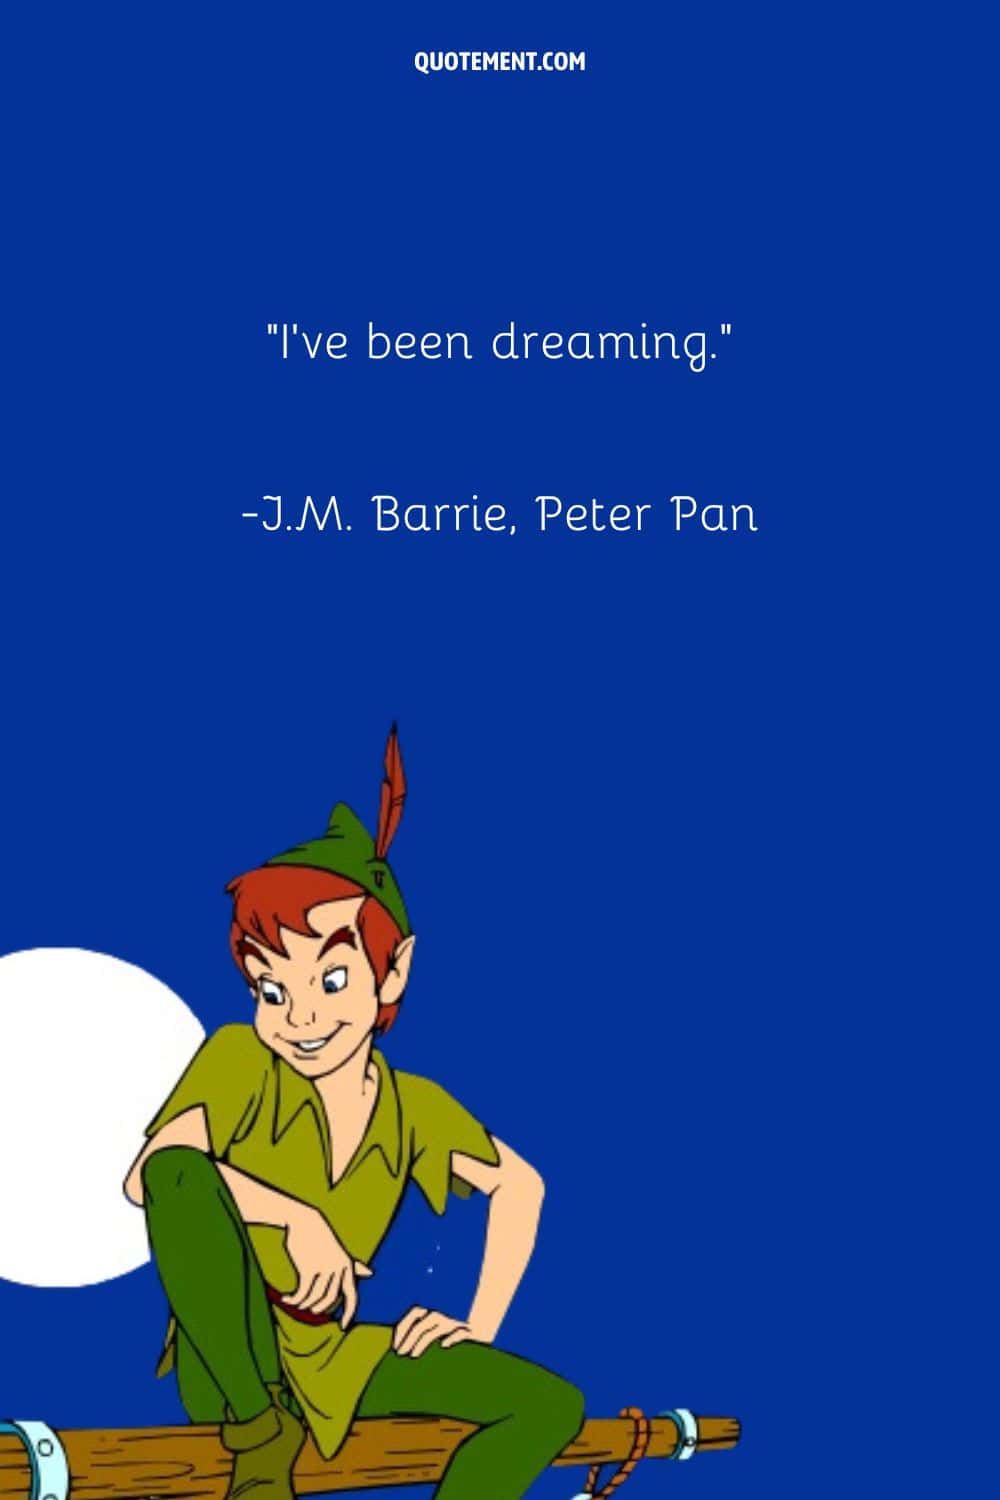 “I’ve been dreaming.” ― J.M. Barrie, Peter Pan